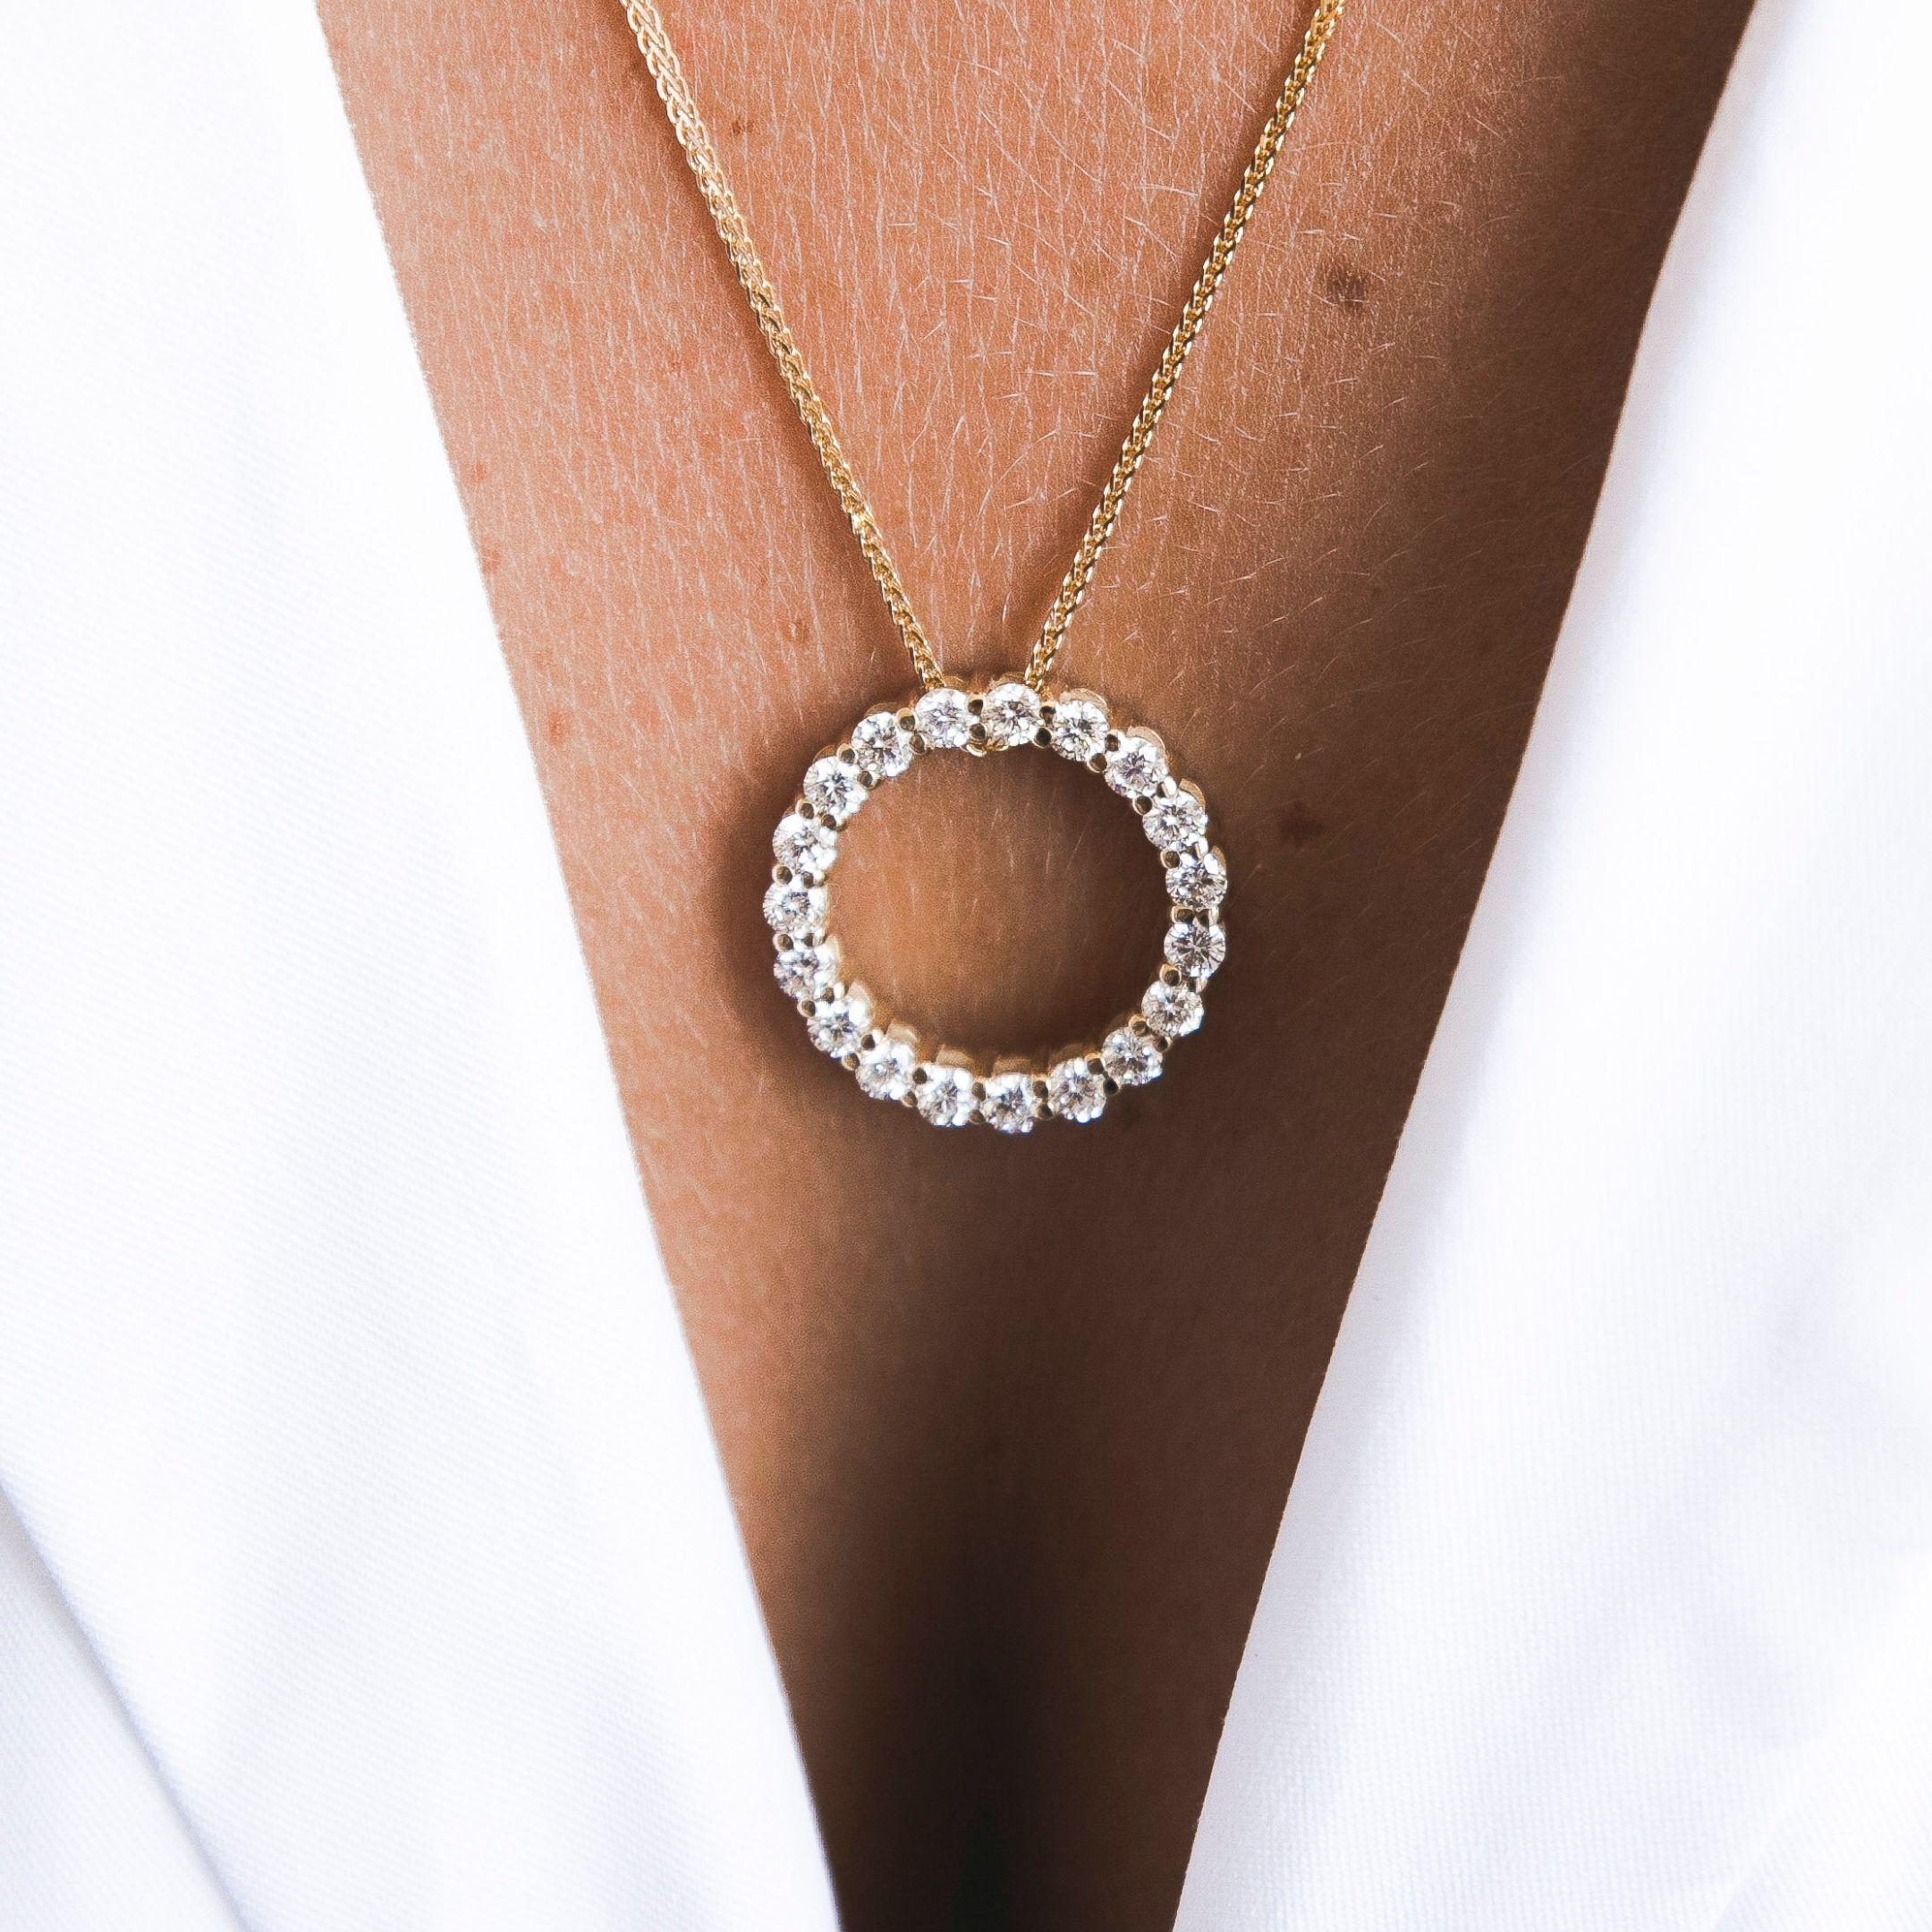 1.30 Carat Diamond Open Circle Eternity Necklace in 14K Yellow Gold - Shlomit Rogel

Make everyday sparkle! A beautiful and classic design, this contemporary open circle pendant necklace is set with 19 genuine diamonds totaling 1.30 carat for a